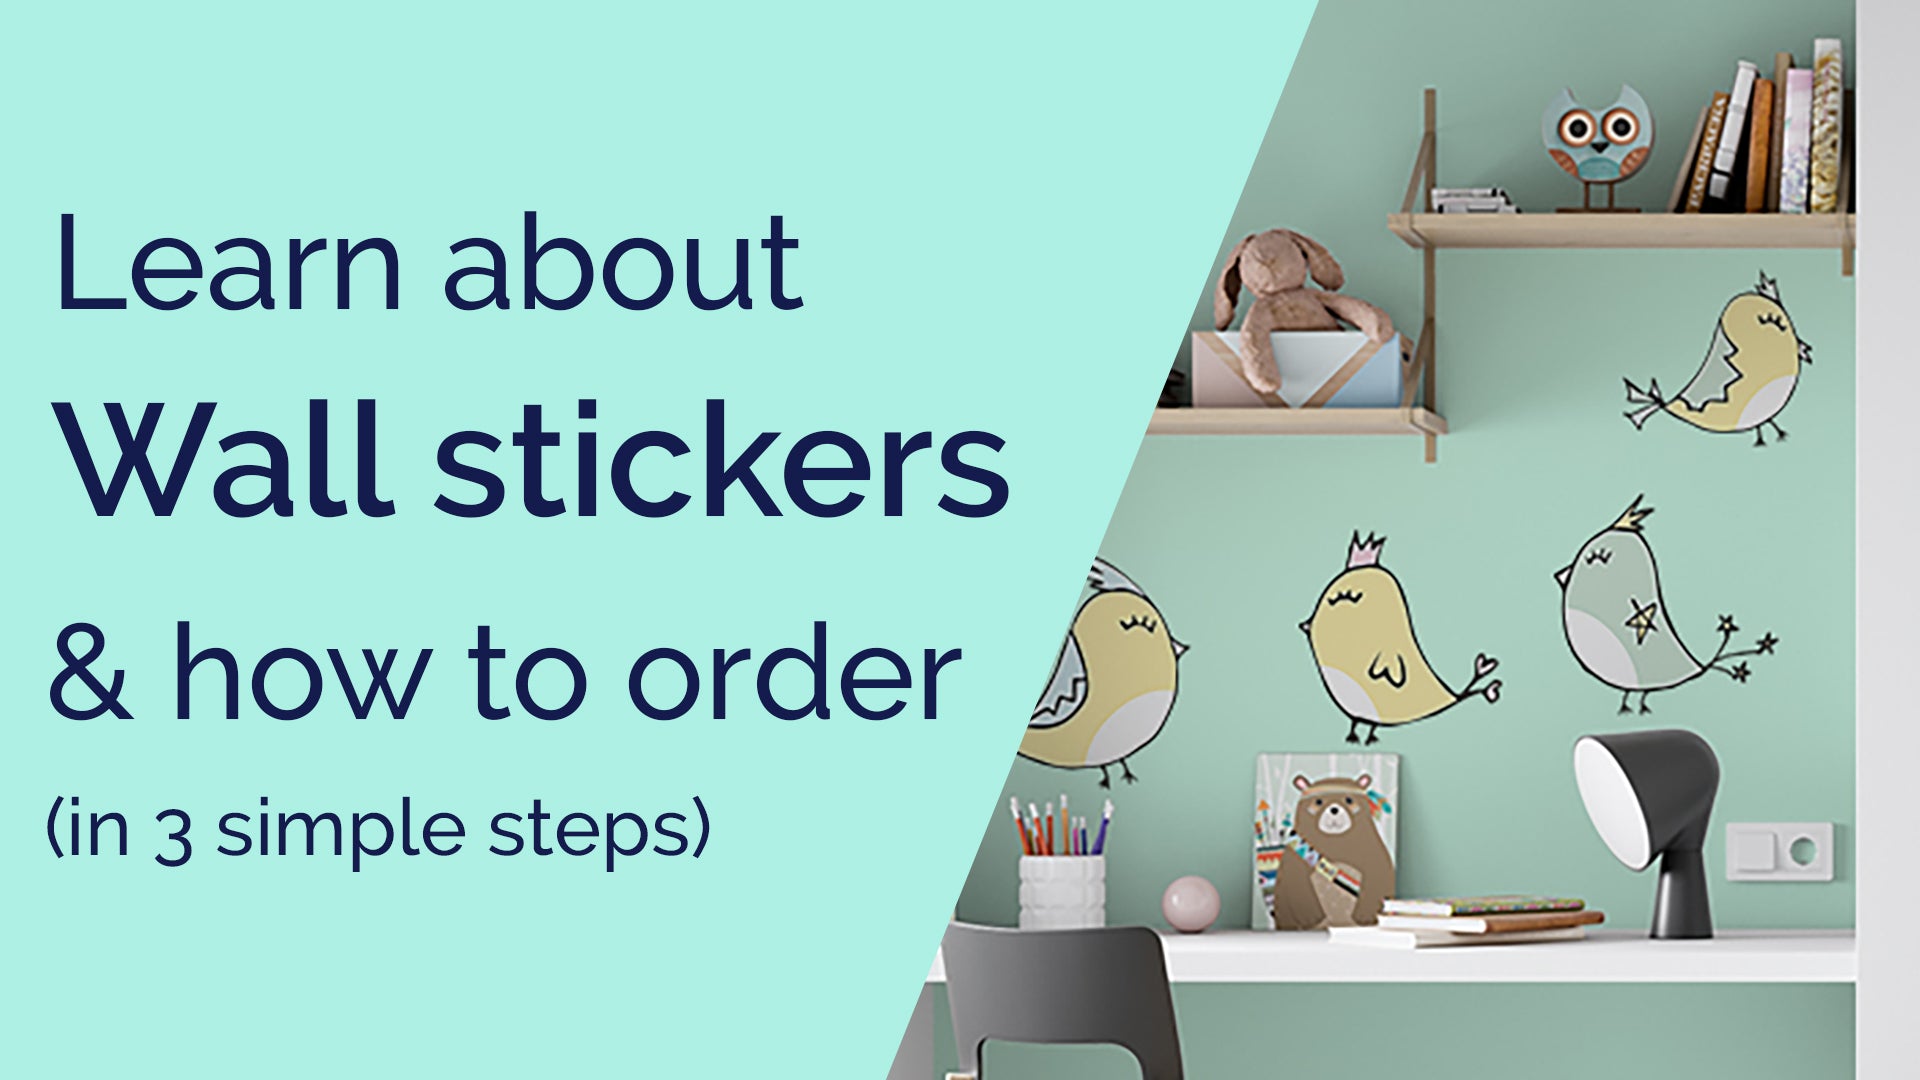 Video laden: A video explaining what wall stickers are and how to order them